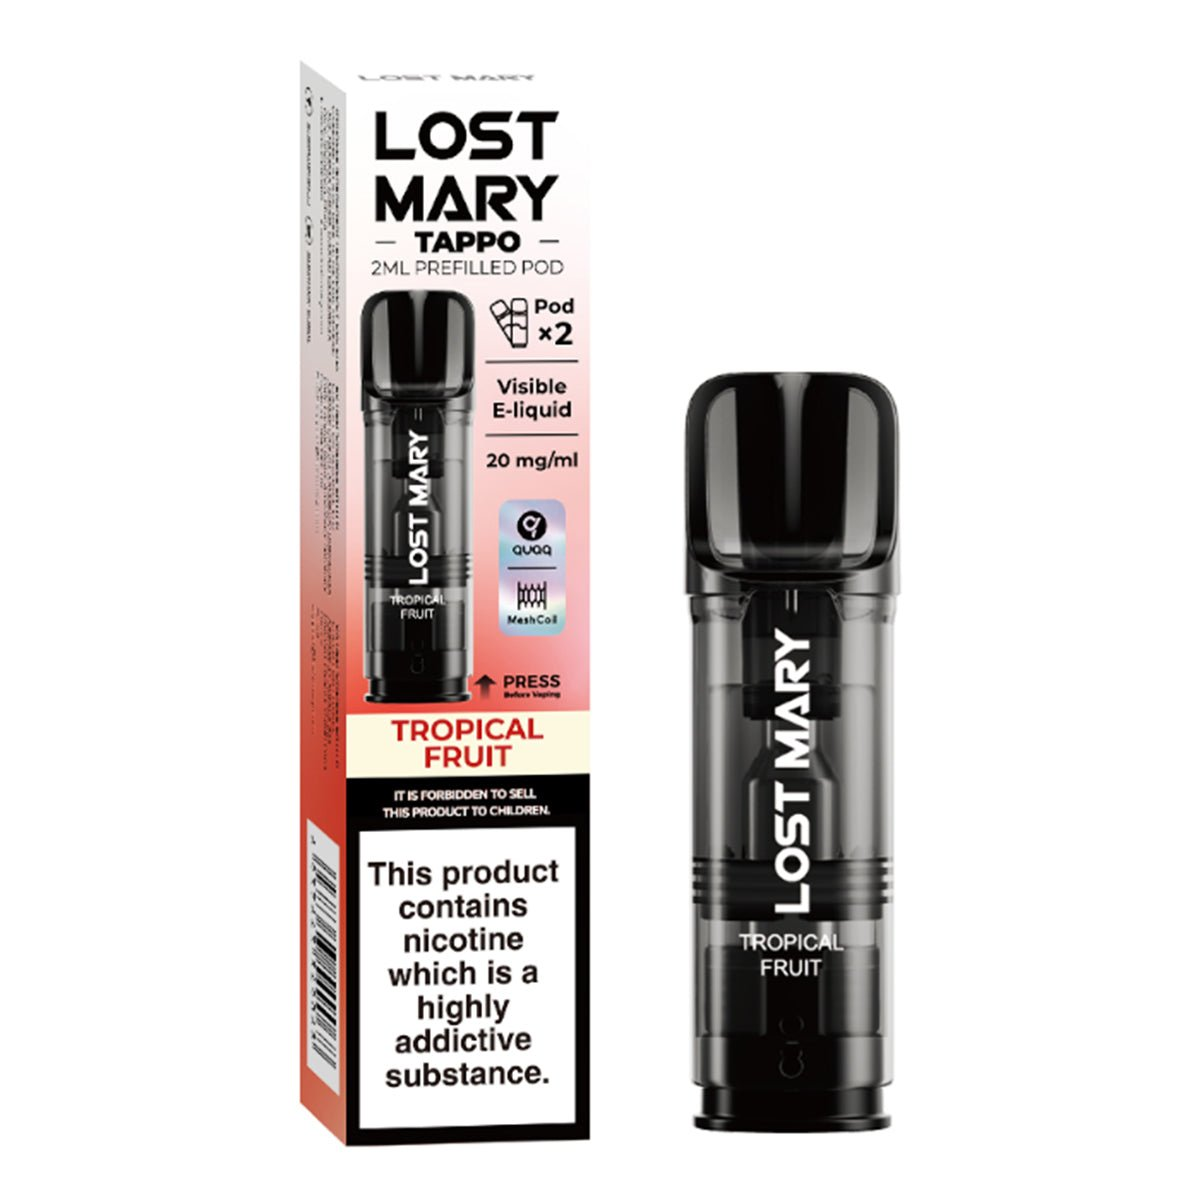 Tropical Fruit Tappo Pre-filled Pod by Lost Mary - Manabush Eliquid - Tobacco E-liquid and Vape Juice